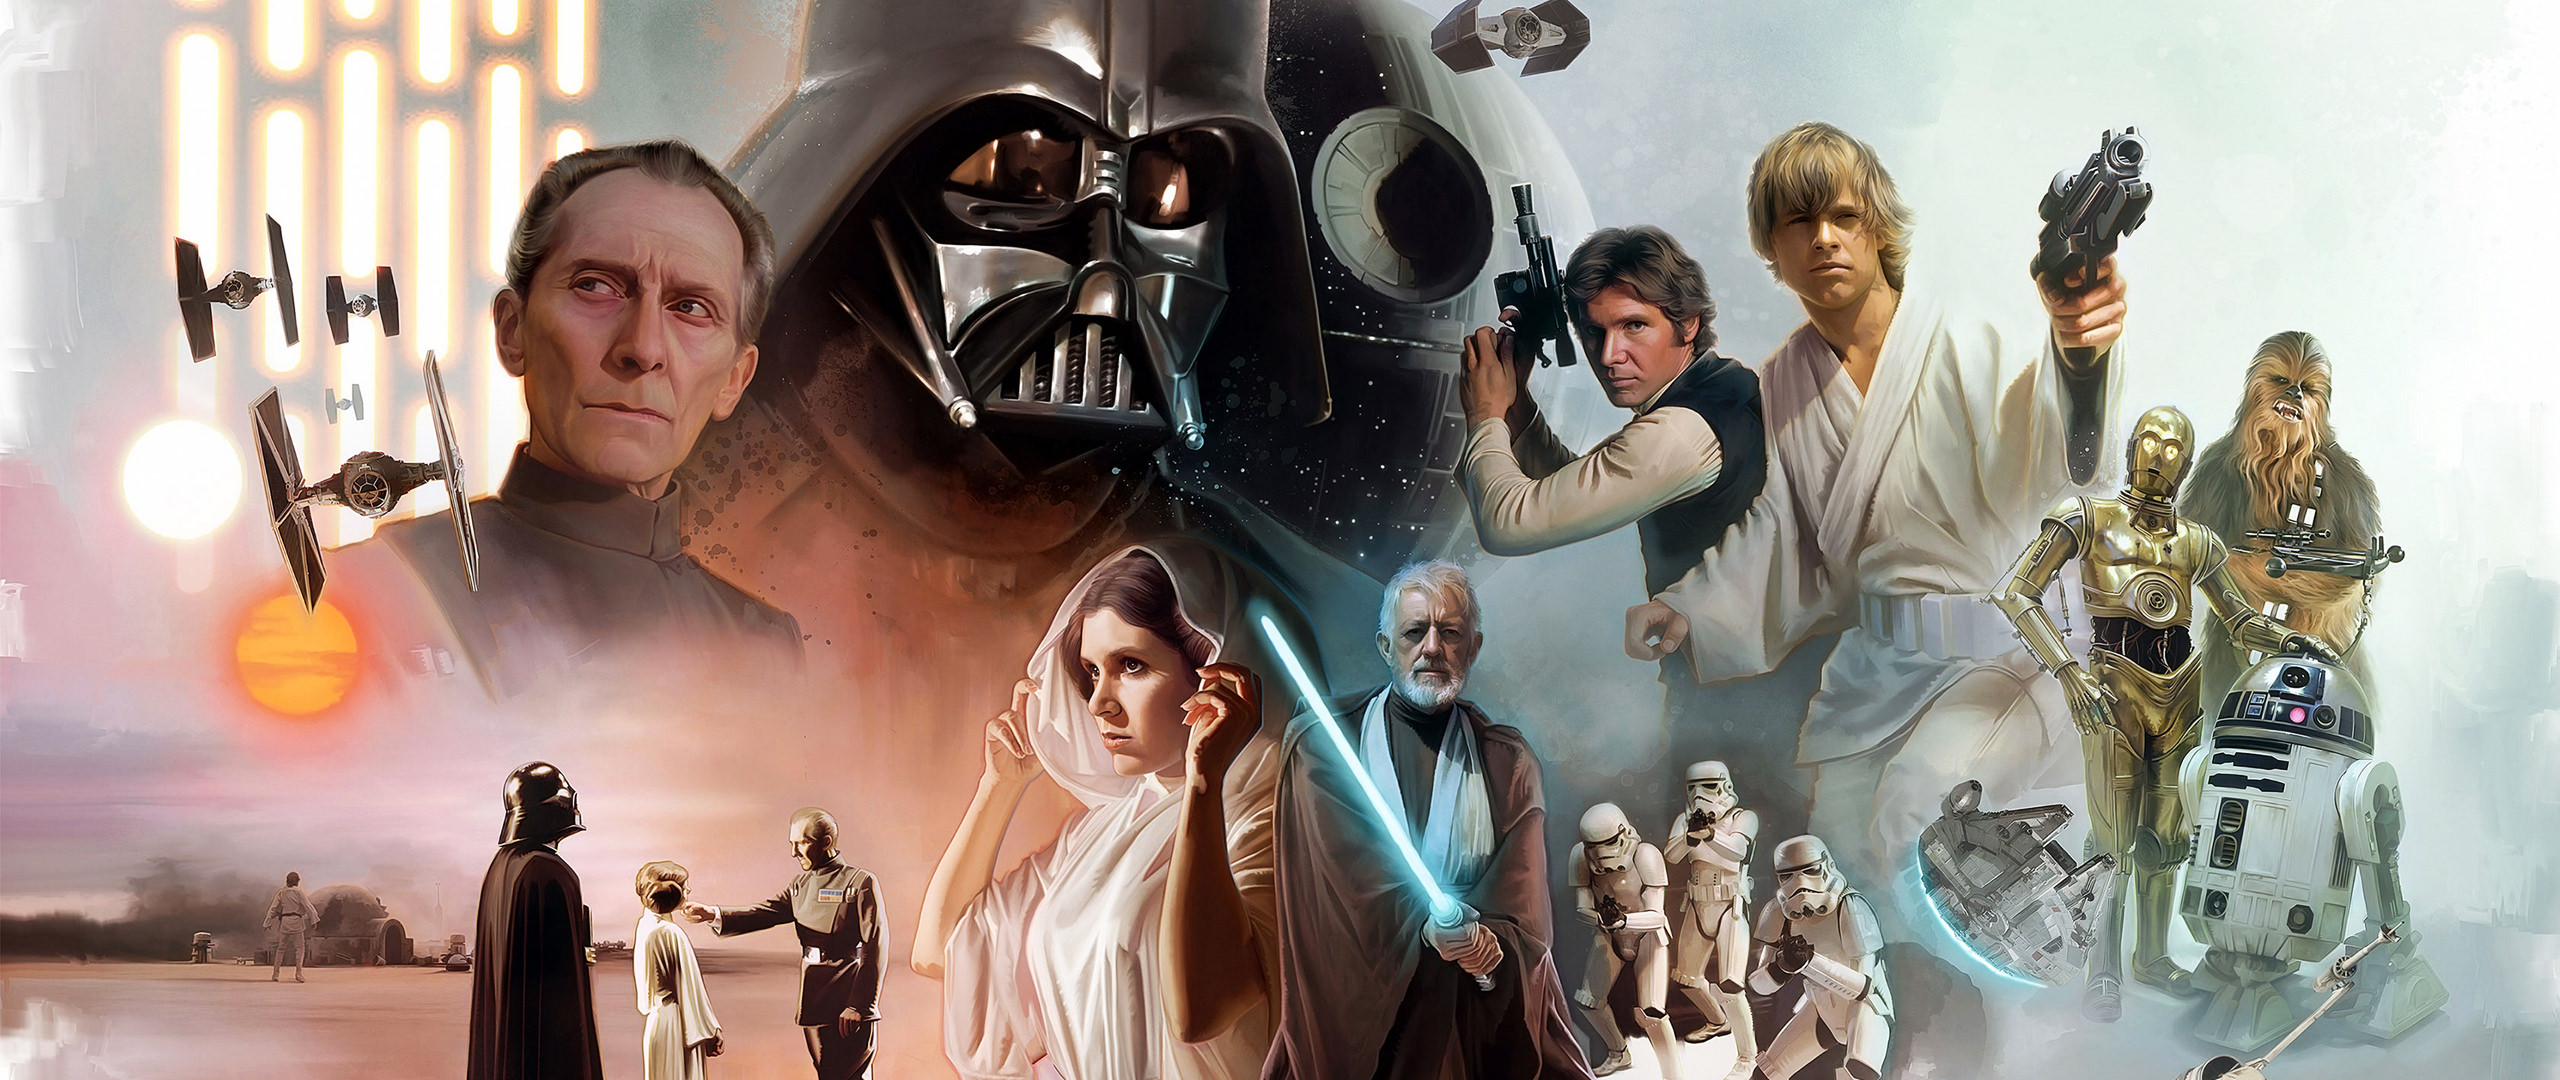 General 2560x1080 Star Wars ultrawide movies movie characters